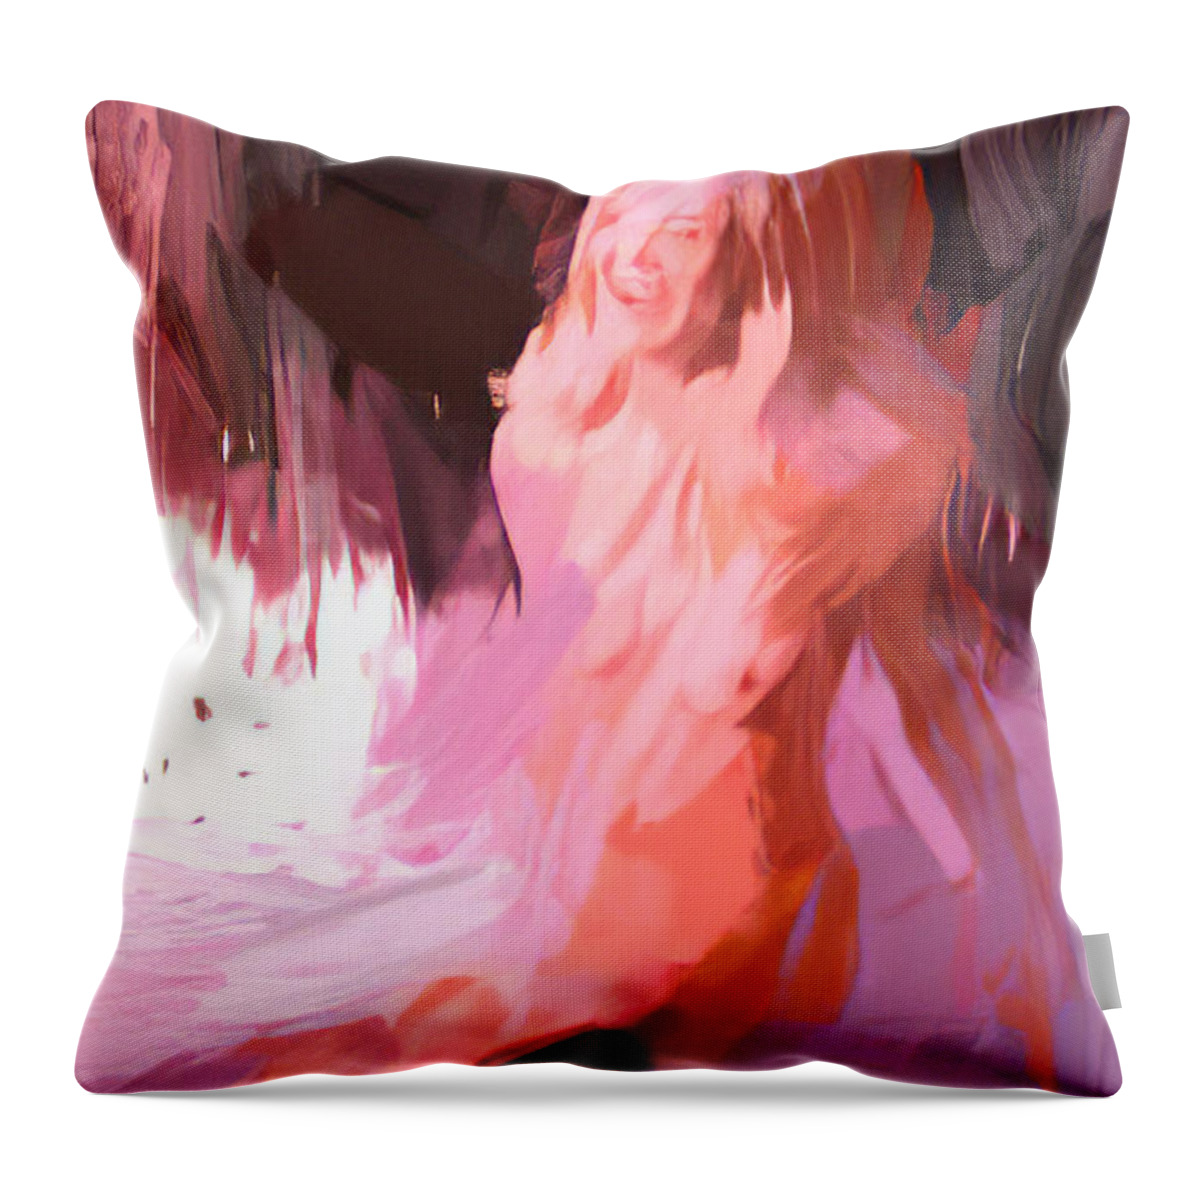 Nude Throw Pillow featuring the digital art In the water abstract by Cathy Anderson